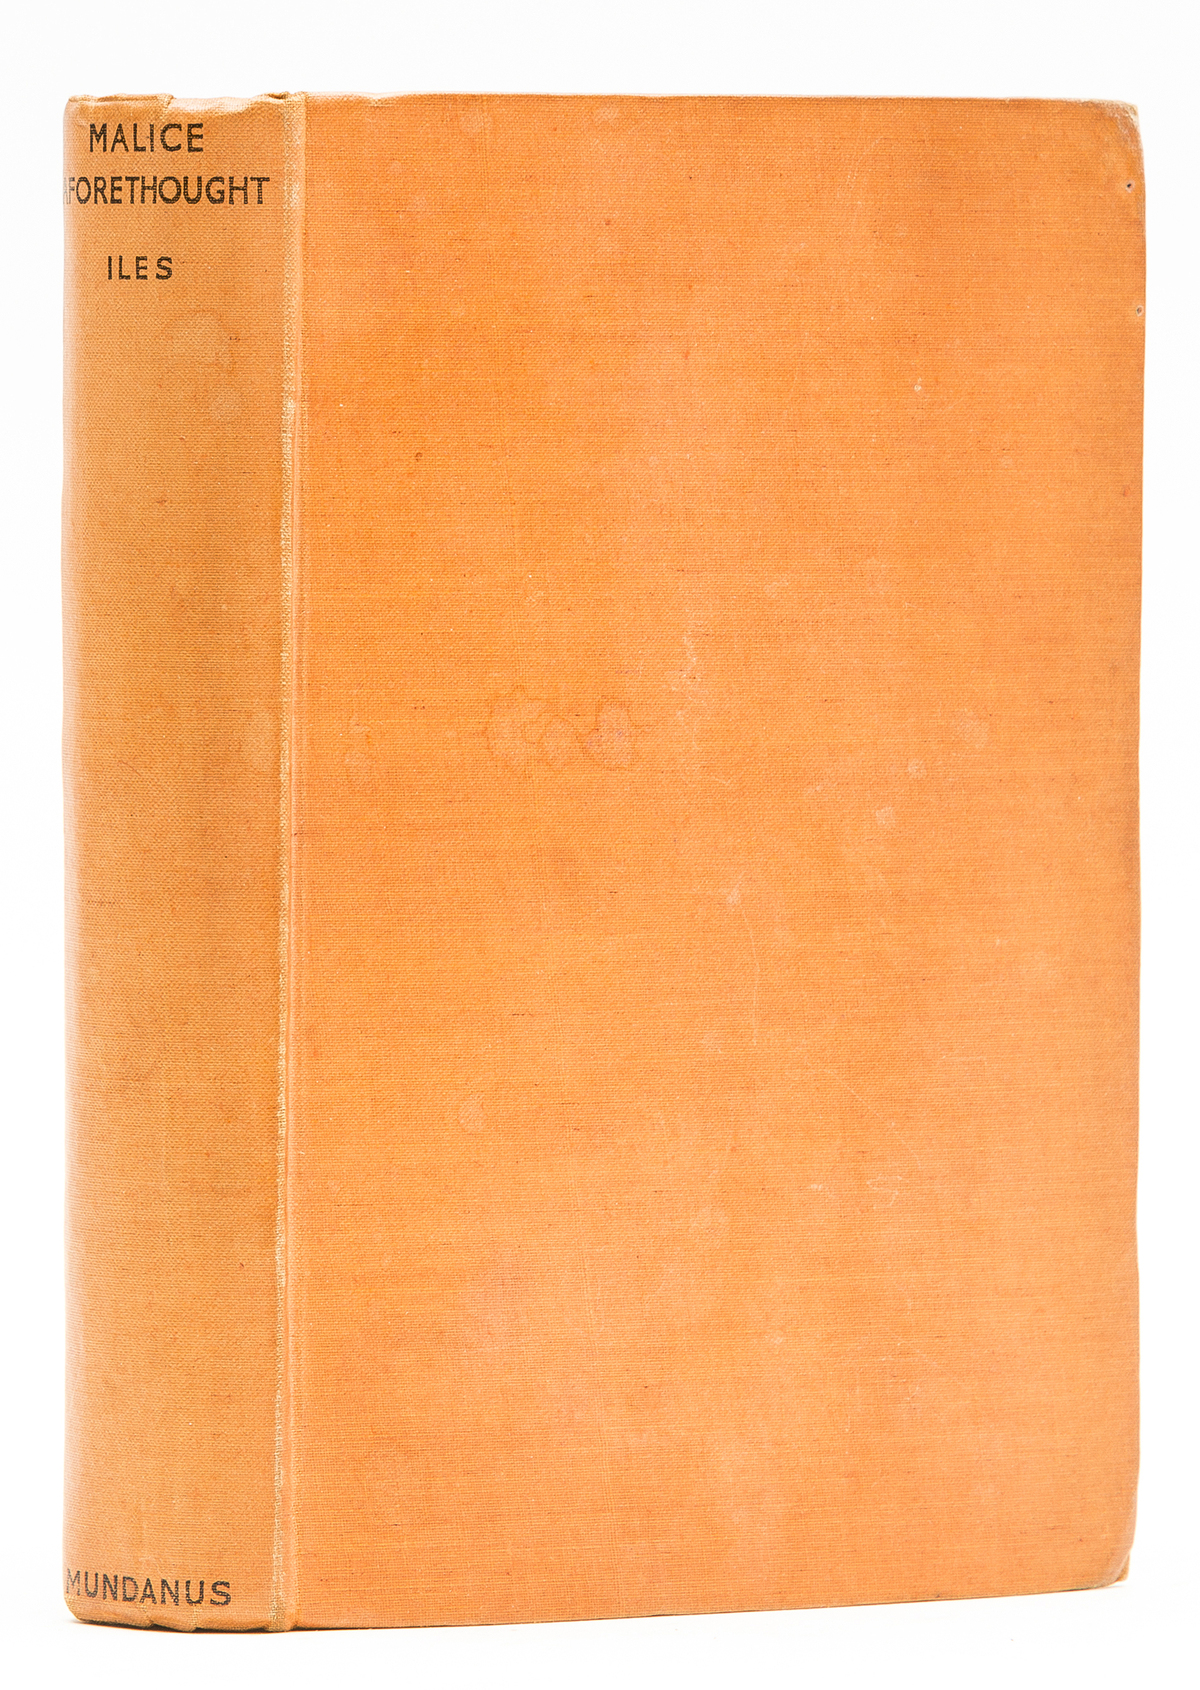 Berkeley (Anthony) Malice Aforethought, first edition, 1931.